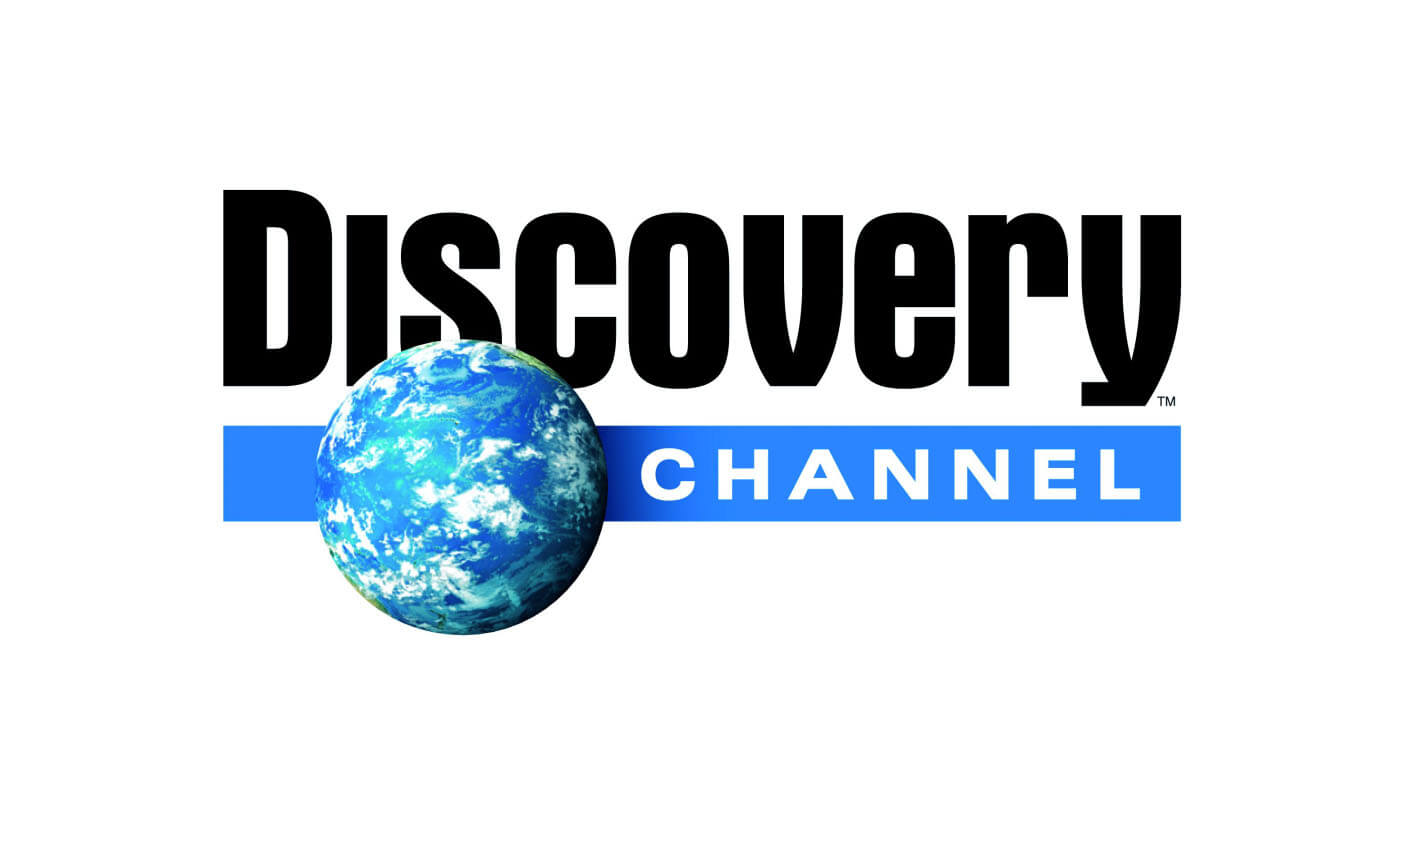 Koen Olthuis On Discovery Channel Next World